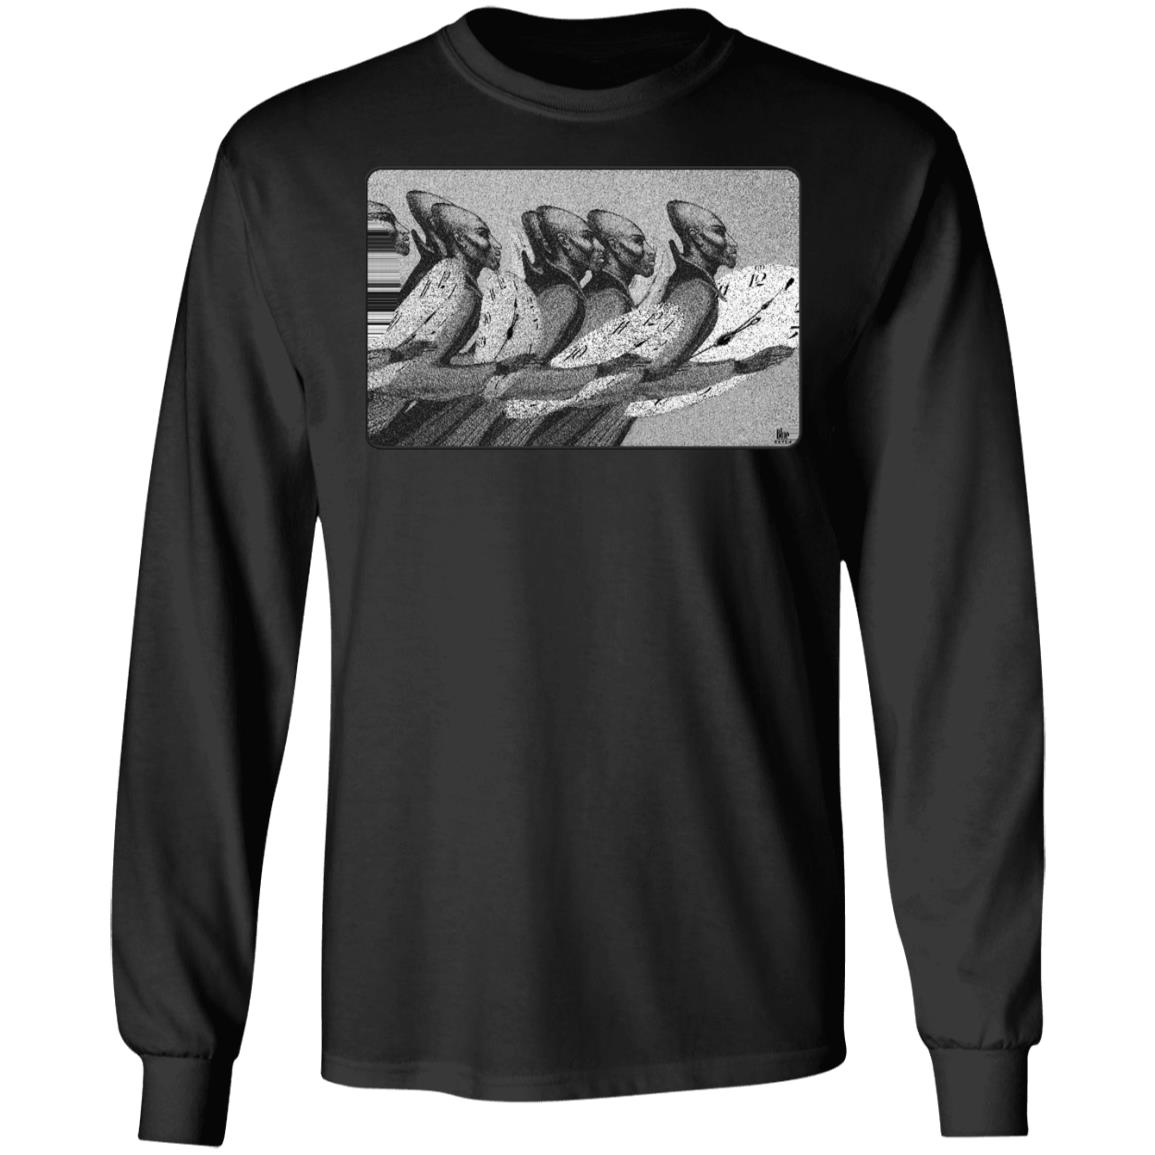 Time Marching On - B&W - Men's Long Sleeve T-Shirt